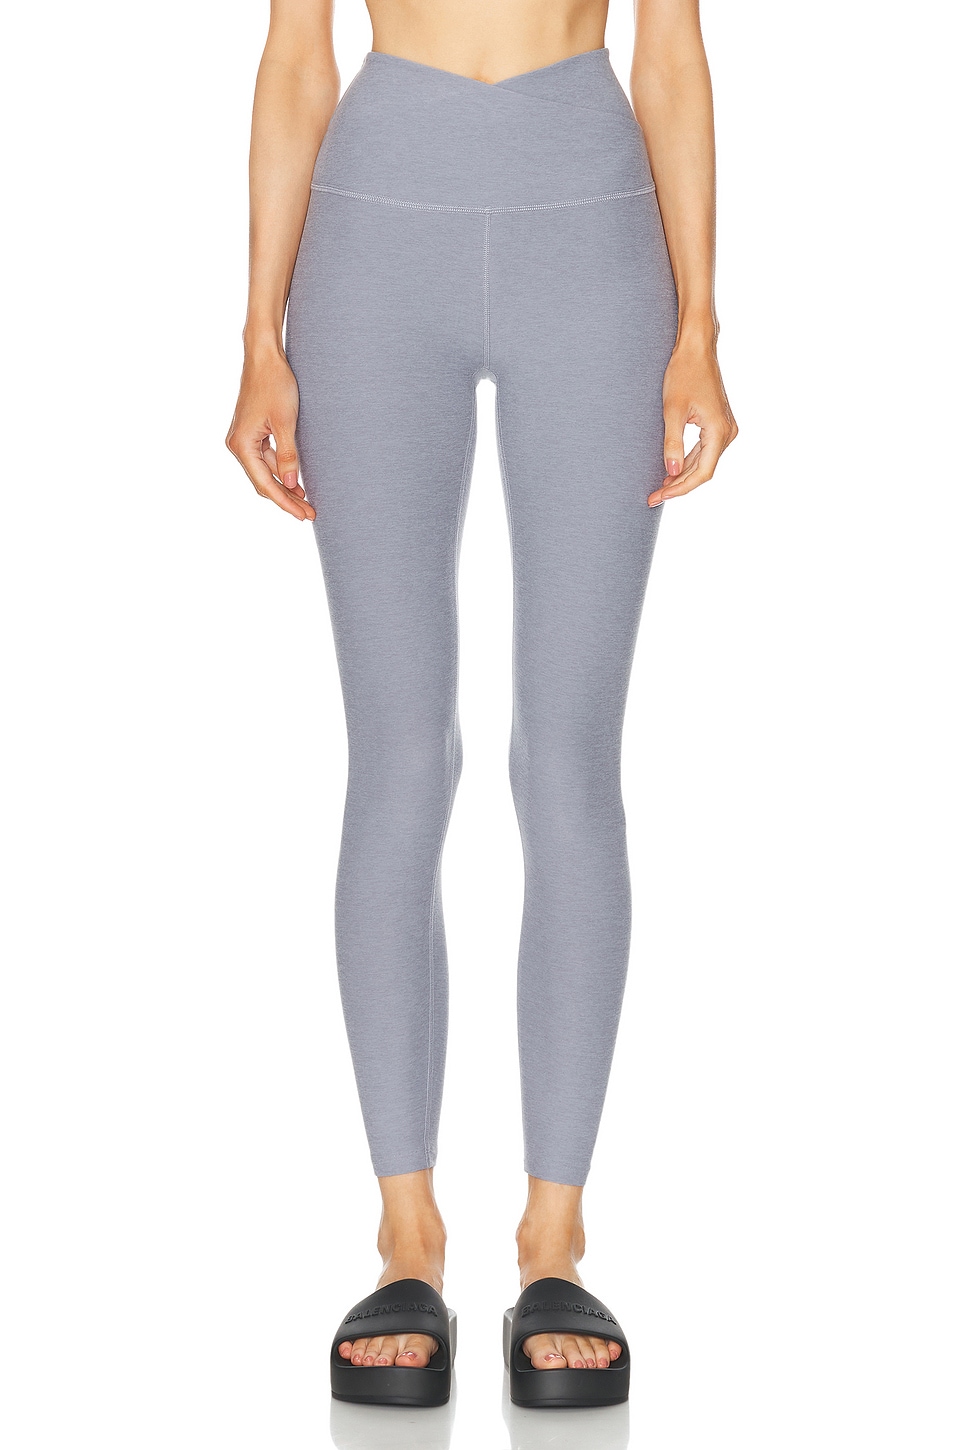 Image 1 of Beyond Yoga Spacedye At Your Leisure High Waisted Midi Legging in Cloud Gray Heather